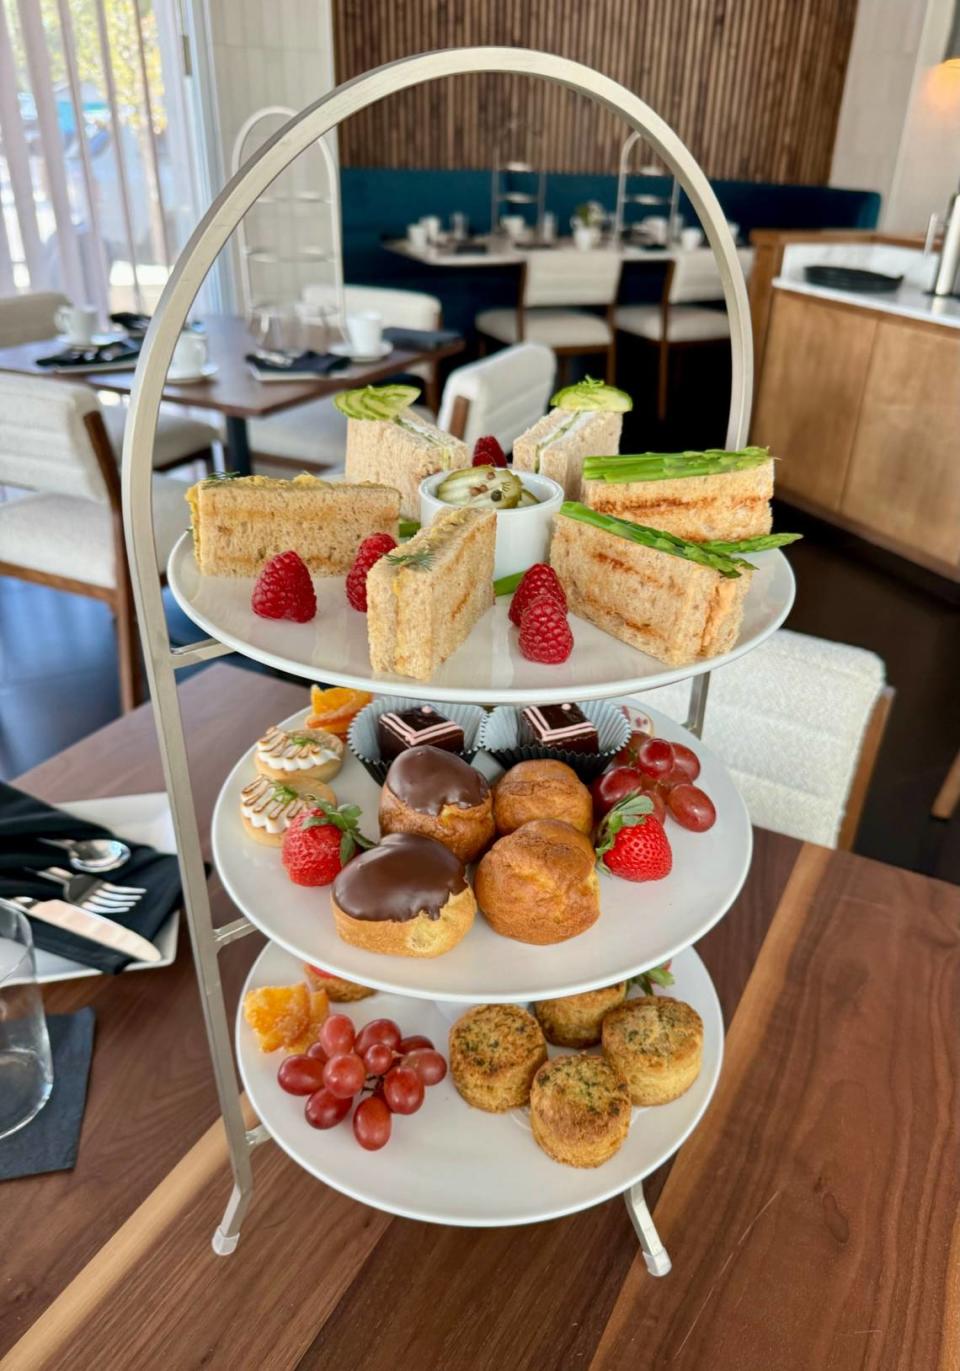 Maiden offfers a vegan afternoon tea service with plant-based tea sandwiches and sweets.